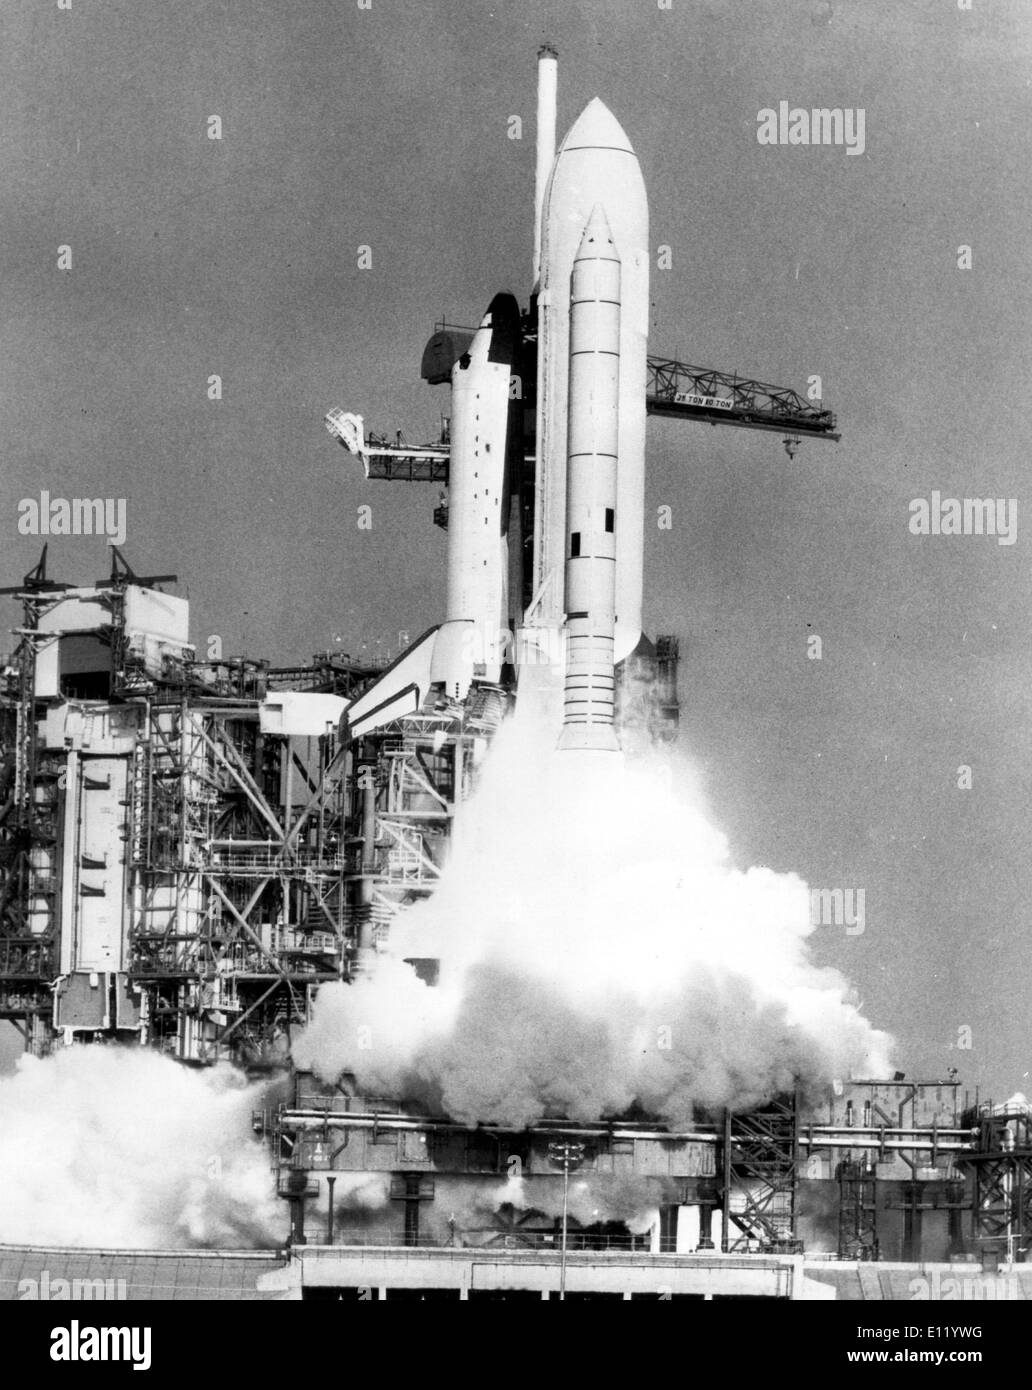 COLUMBIA lifts off from Launch Complex 39, at the Kennedy Space Center Apr 12, 1981 Stock Photo